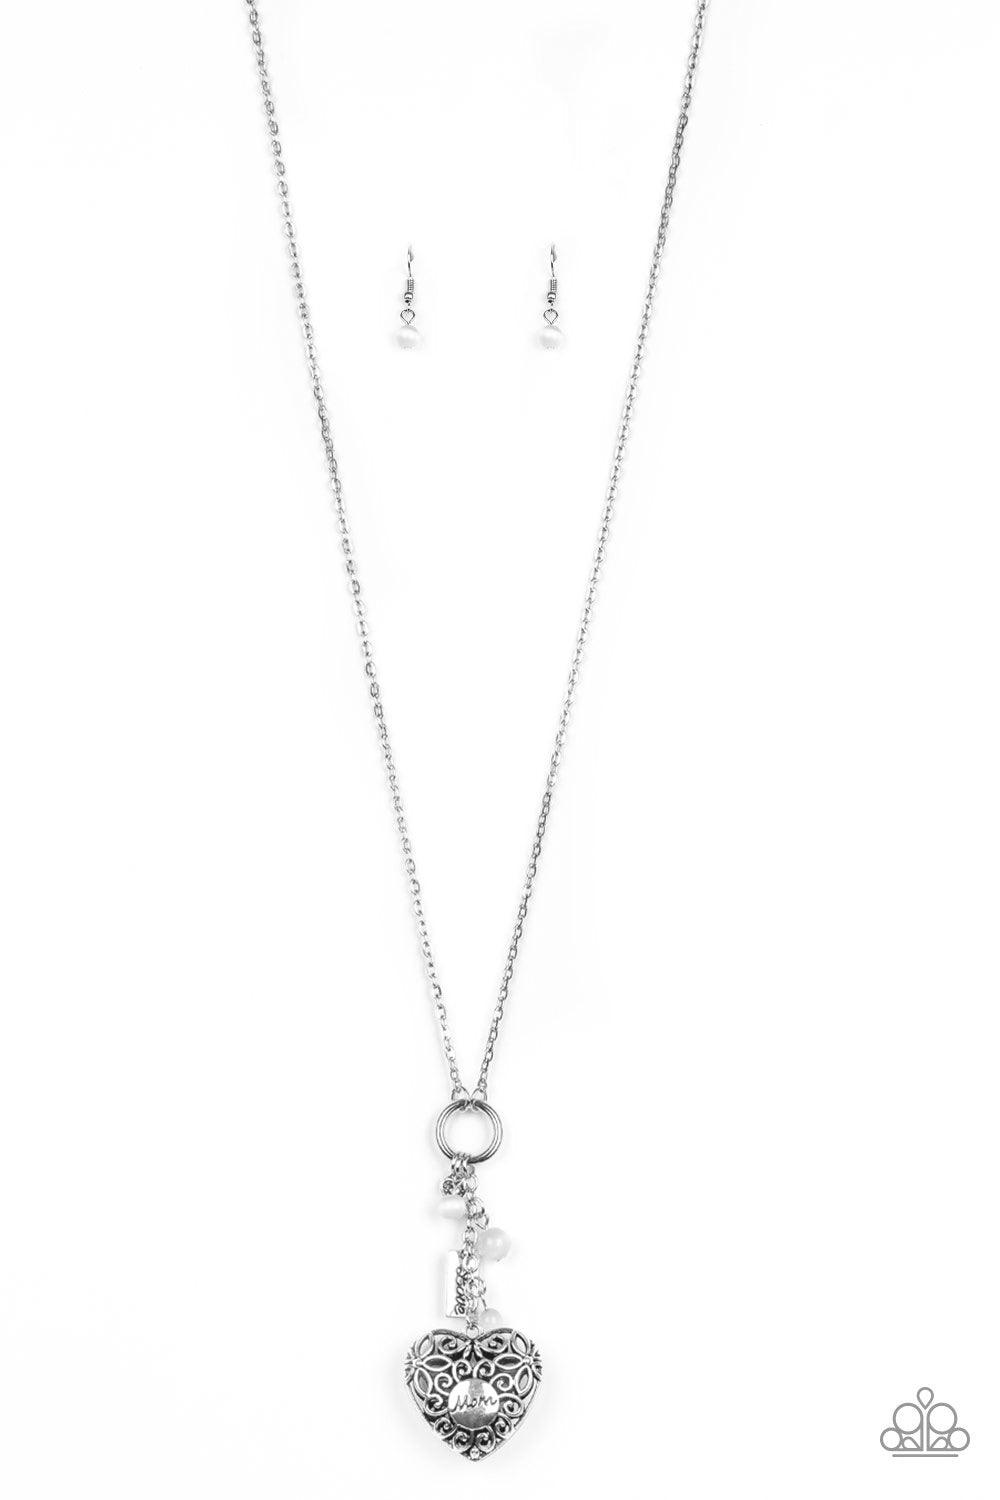 Paparazzi Accessories Mom Hustle - White Infused with white cat's eye accents, a dainty silver heart, rectangular frame stamped with "love", and a locket-like heart stamped with the word "mom", collect at the bottom of a silver chain for a vintage inspire